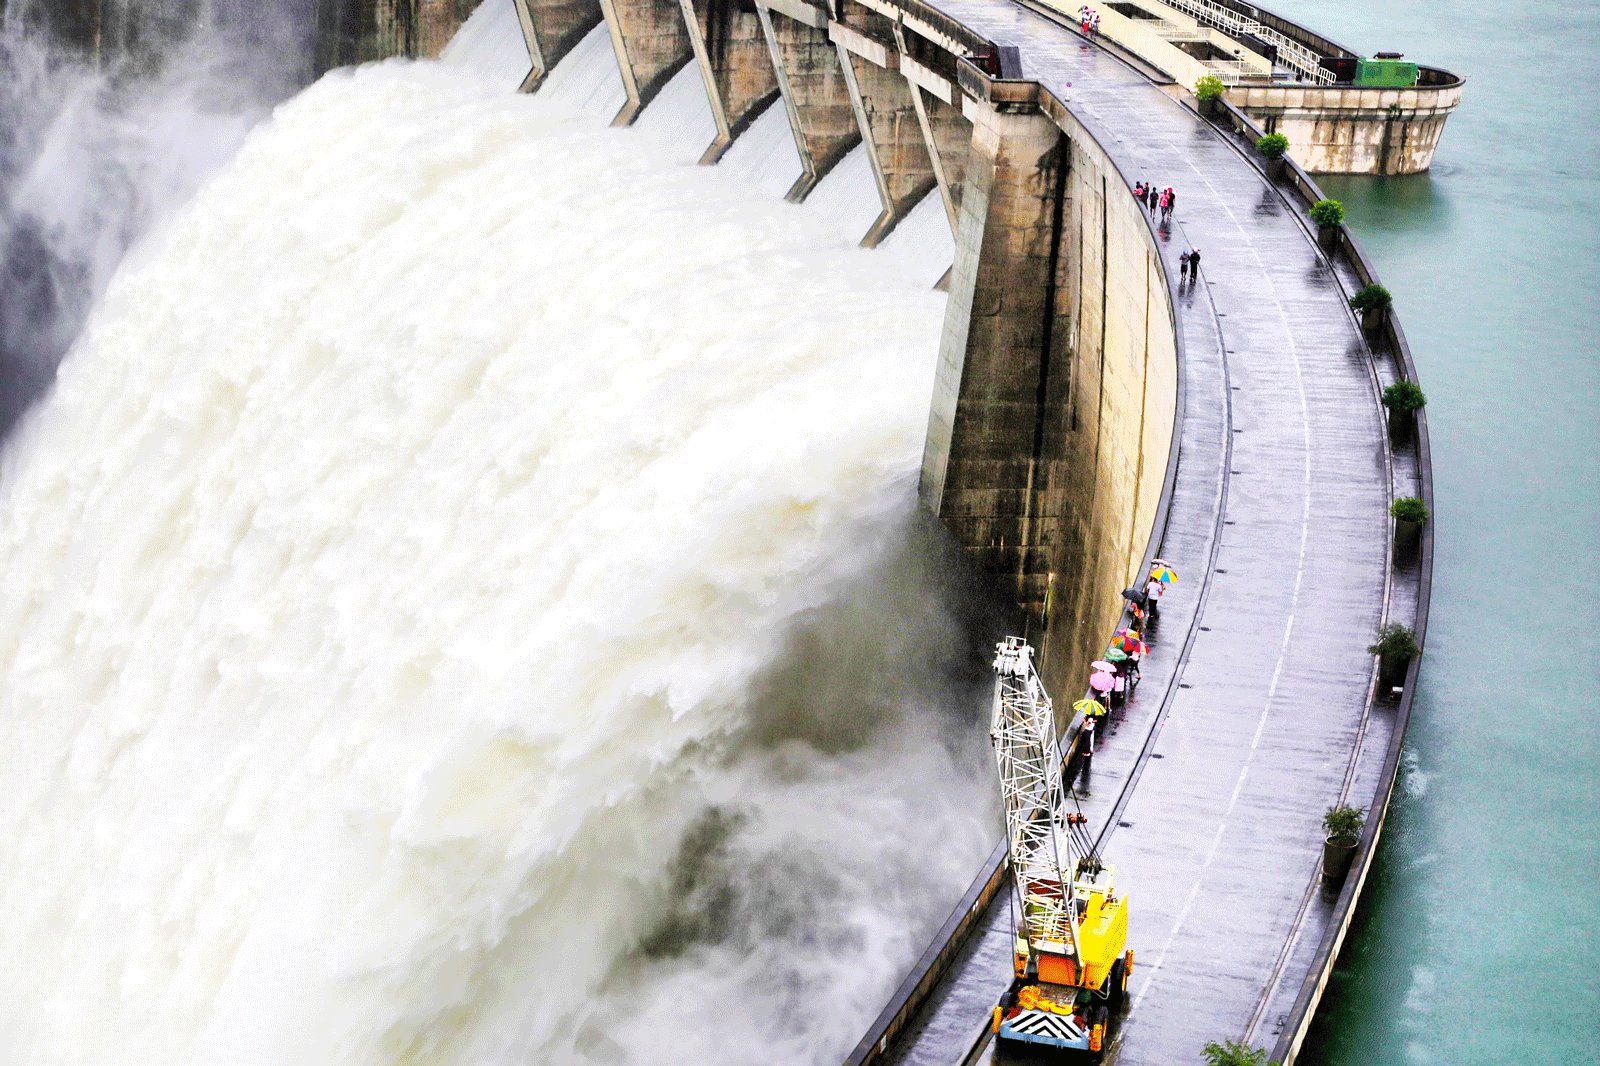 How to see dam water release in Kandy